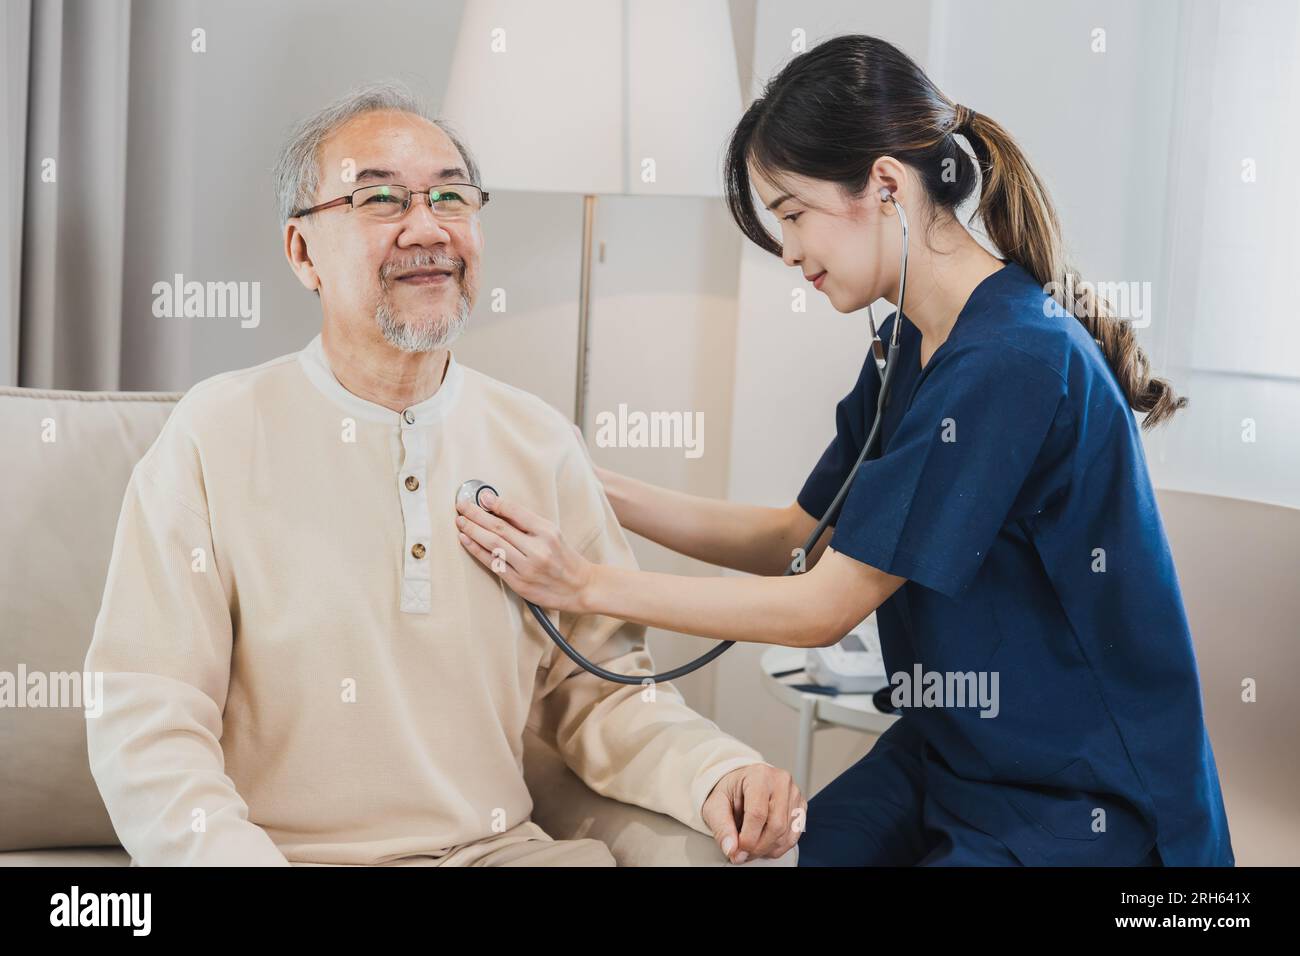 Asian nurse, doctor woman assisting checking heart rate stethoscope of Senior Asian patient man Stock Photo